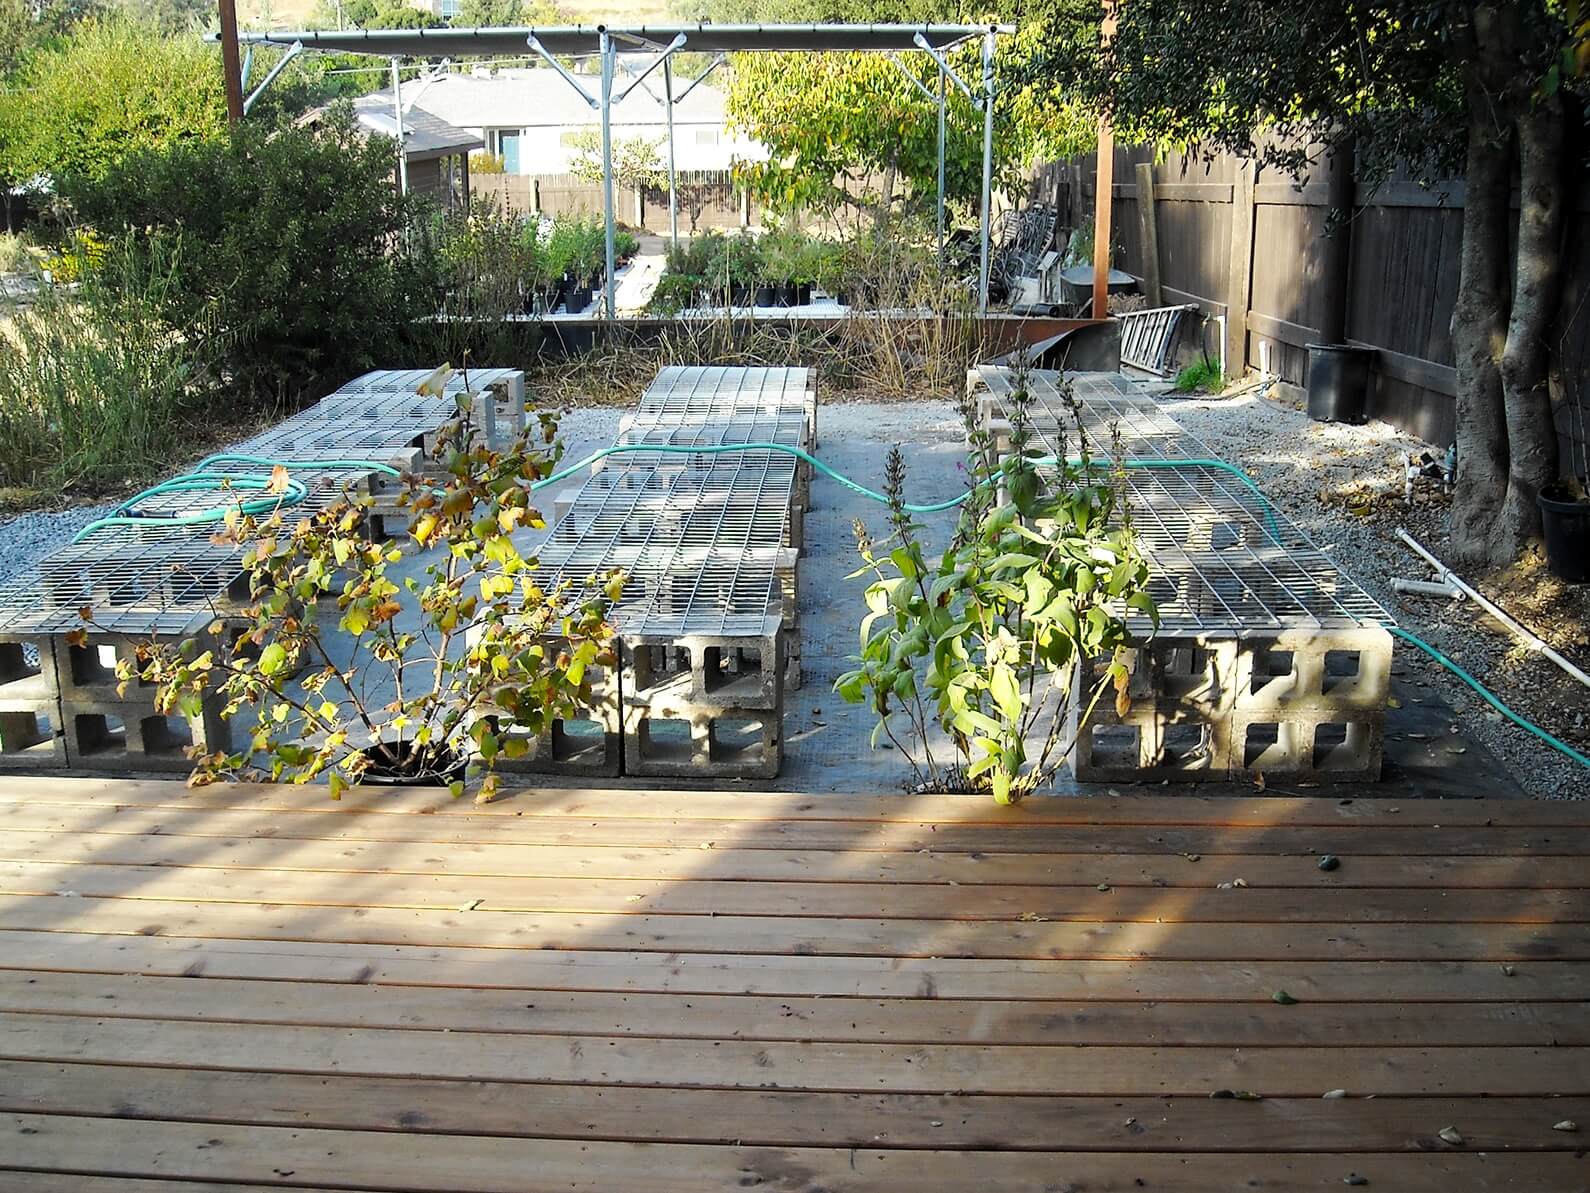 Sept 2019.  New nursery benches for larger plants have been installed; the shade house is beyond them and holds smaller plants.